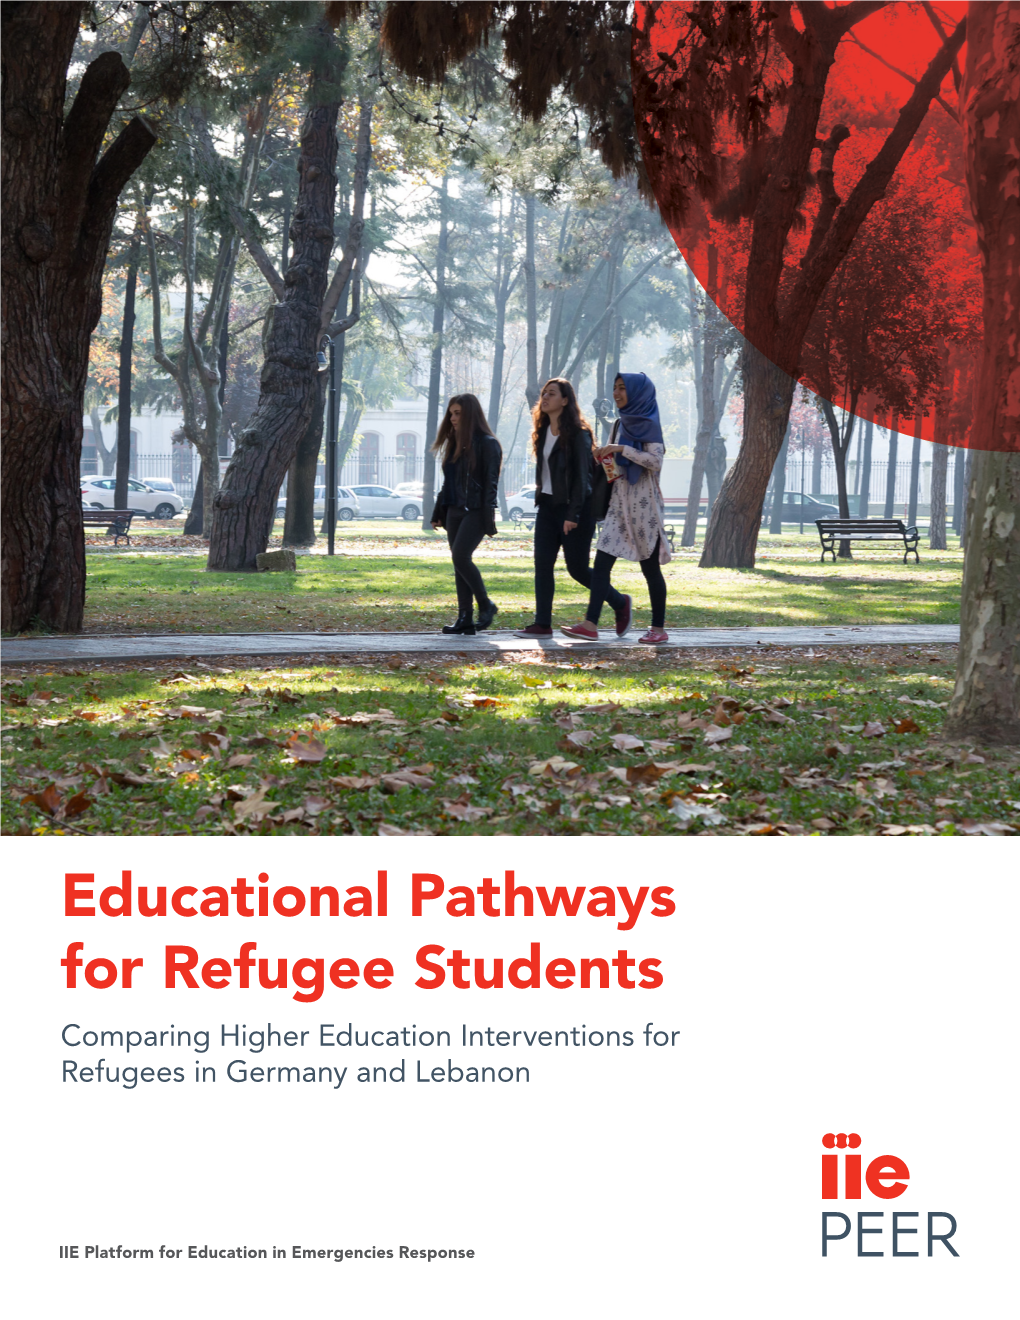 Educational Pathways for Refugee Students Comparing Higher Education Interventions for Refugees in Germany and Lebanon